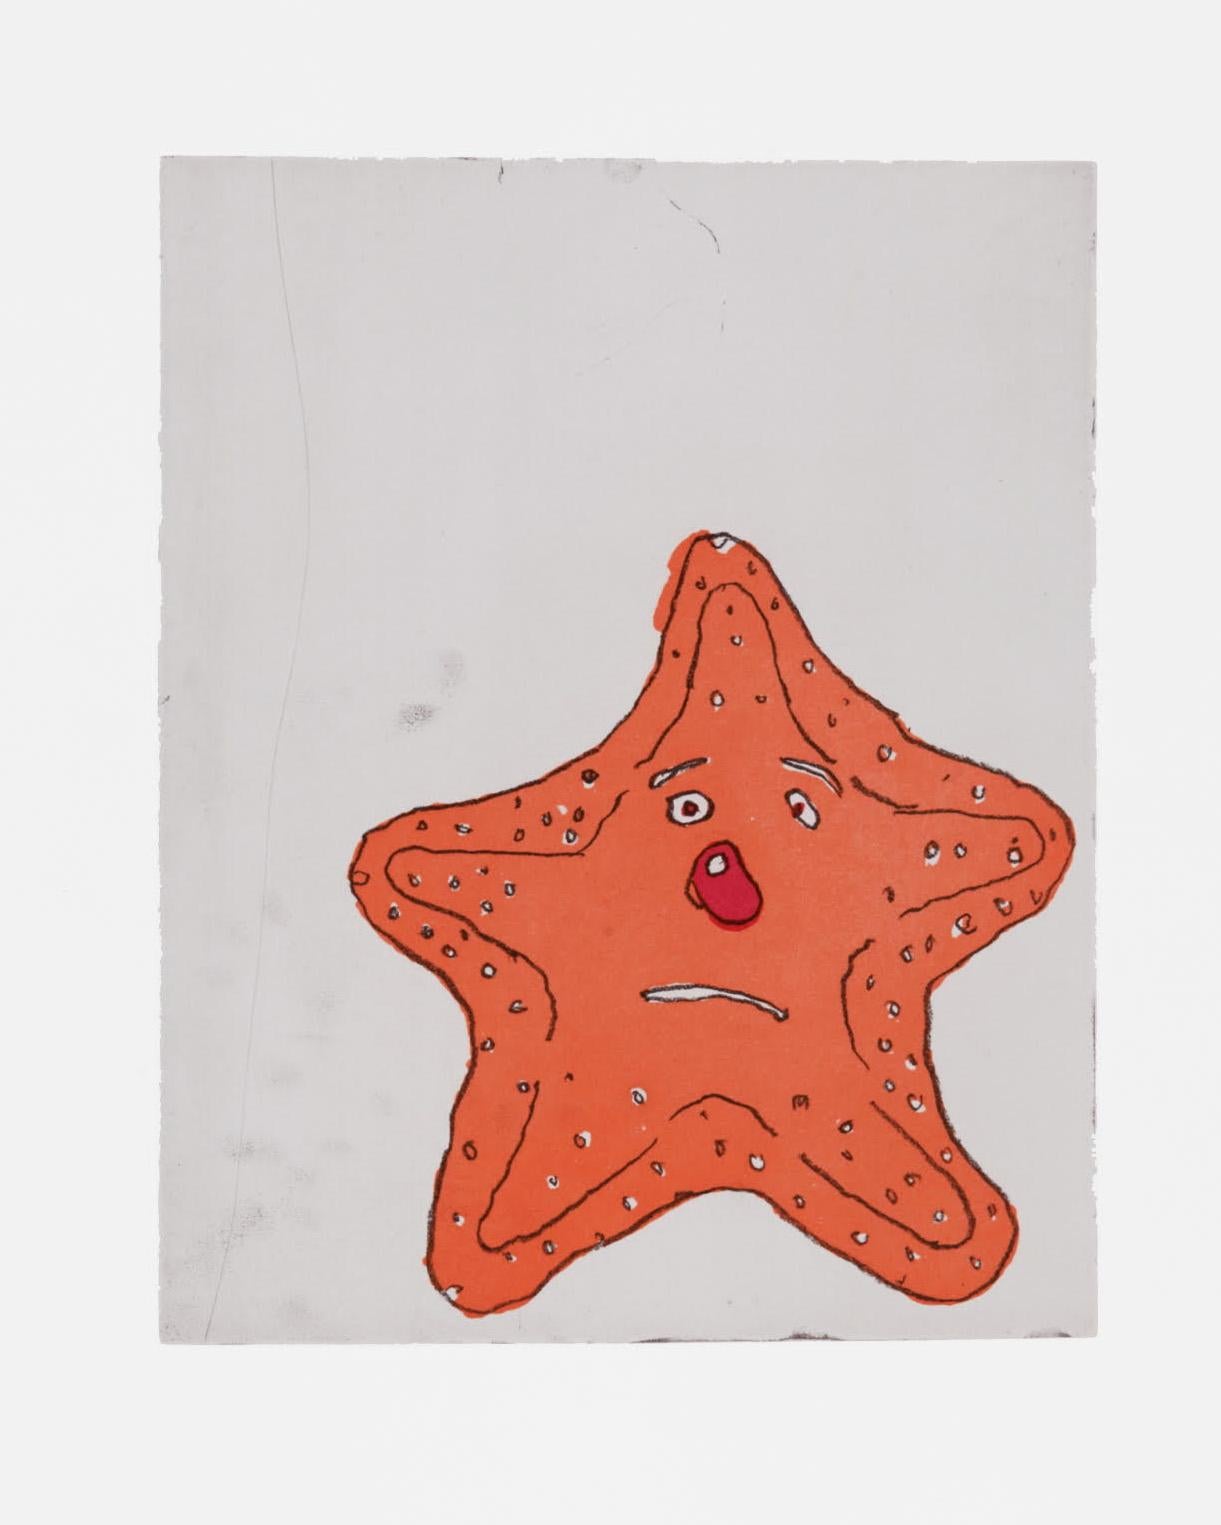 Donald Baechler, Starfish, 1999
A fun, whimsical, and highly decorative signed limited edition Baechler piece that works well in any setting.  
 
Medium: Soft-ground etching and aquatint on Magnani Pescia paper.
Overall size including boarders: 22 x